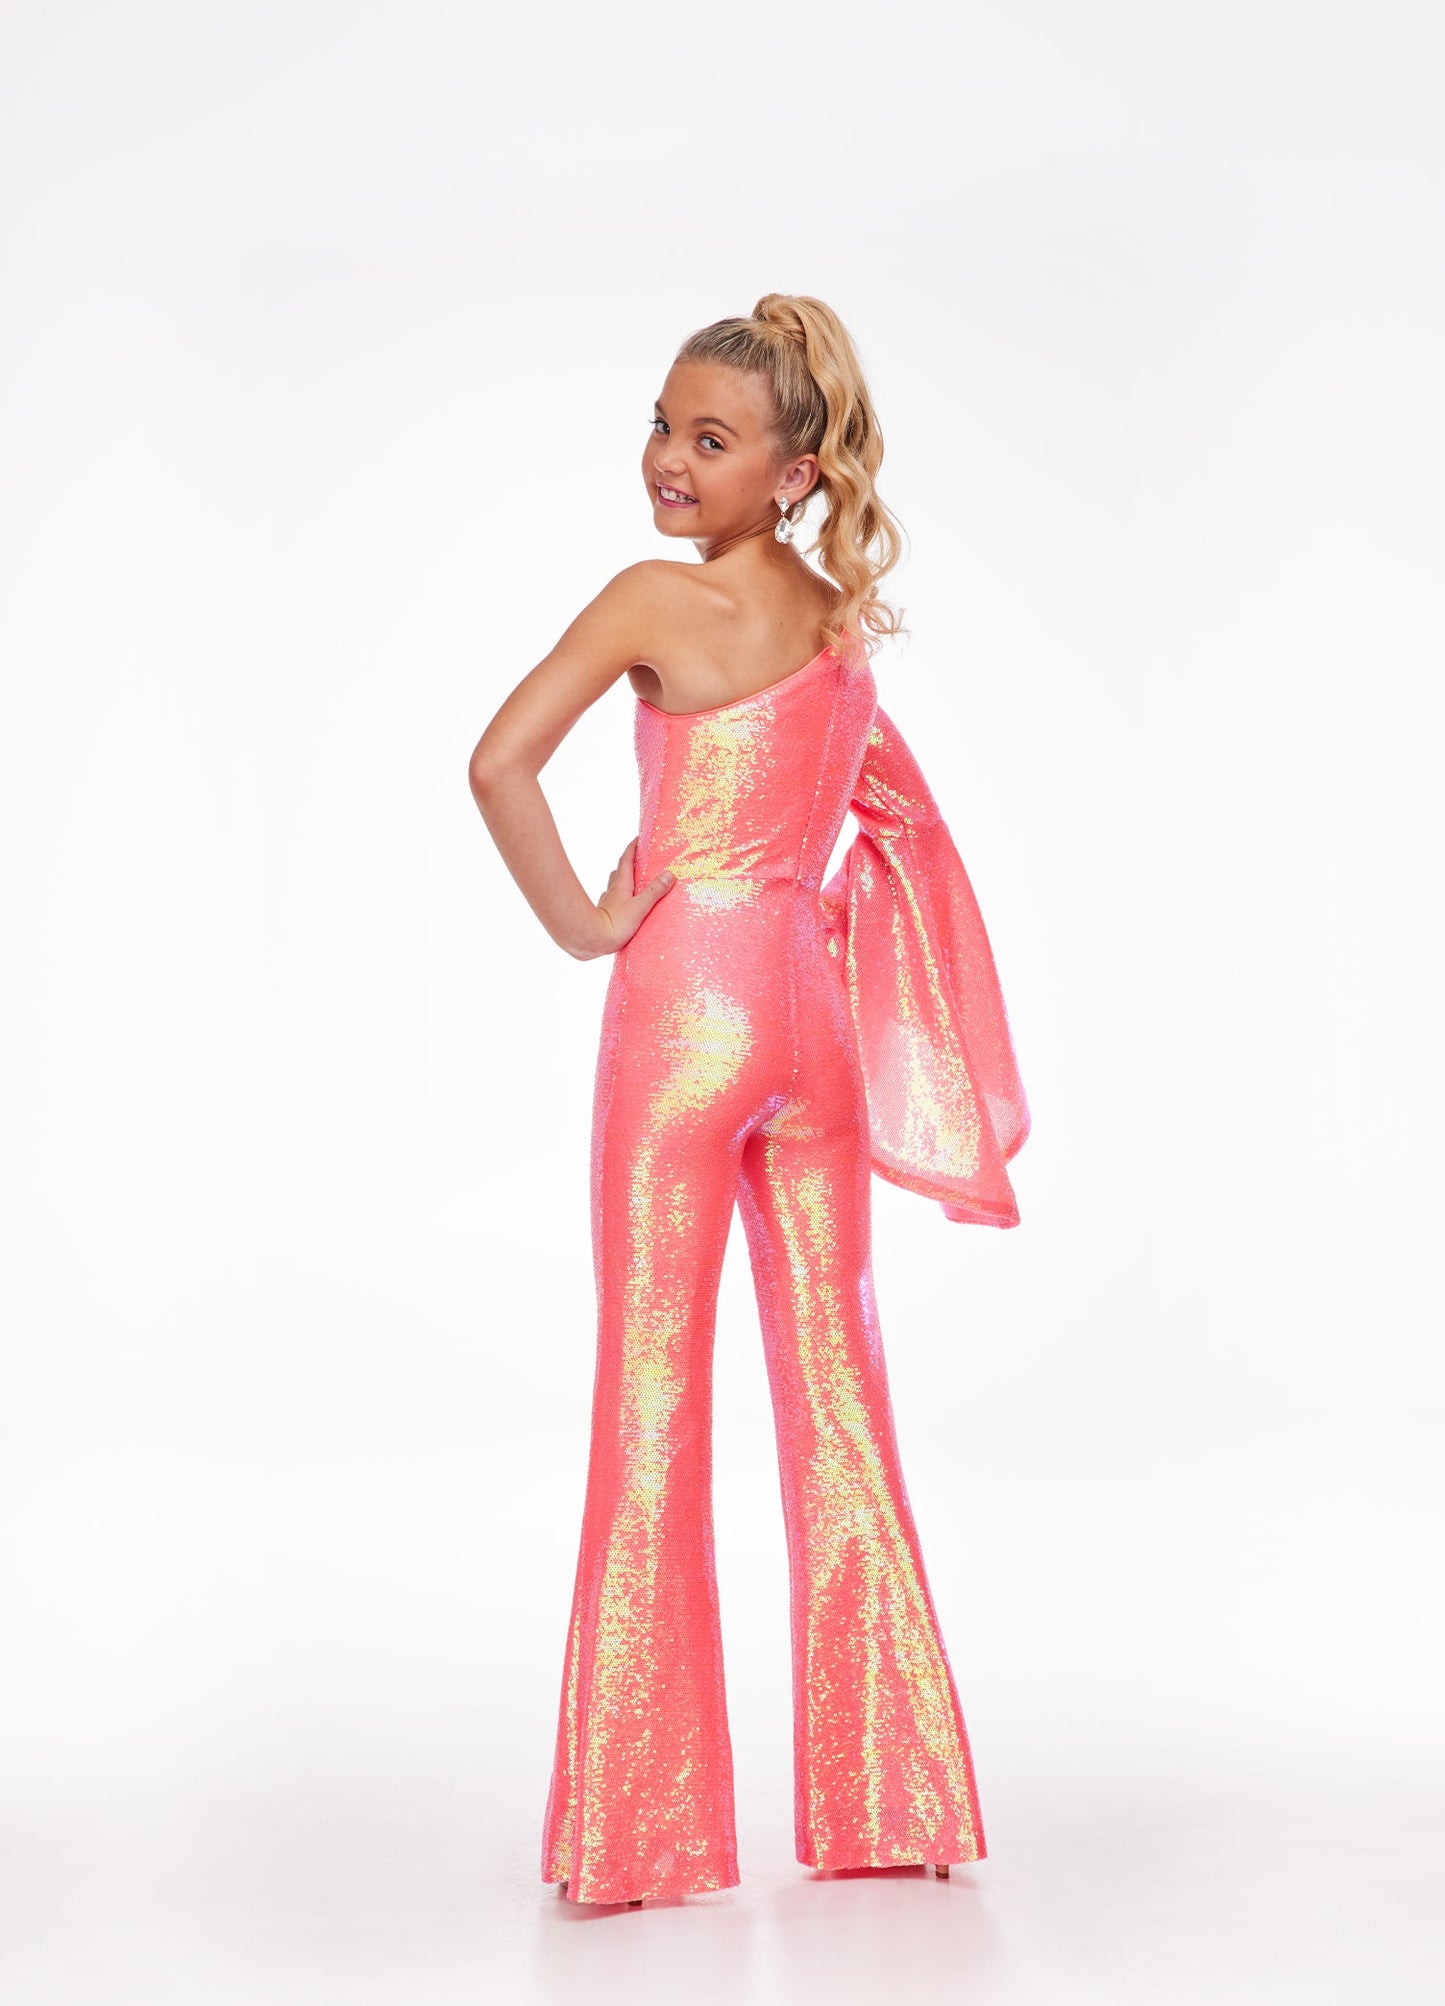 Ashley Lauren Kids 8110 One Shoulder Jumpsuit Long Bell Sleeve Sequin Pageant This groovy one shoulder jumpsuit features an oversized bell sleeve and flared pants. One Sleeve Oversized Bell Sleeve Sequin Fabric Jumpsuit Available Sizes: 2-16 Available Colors: Coral, Lilac, Yellow, Neon Green